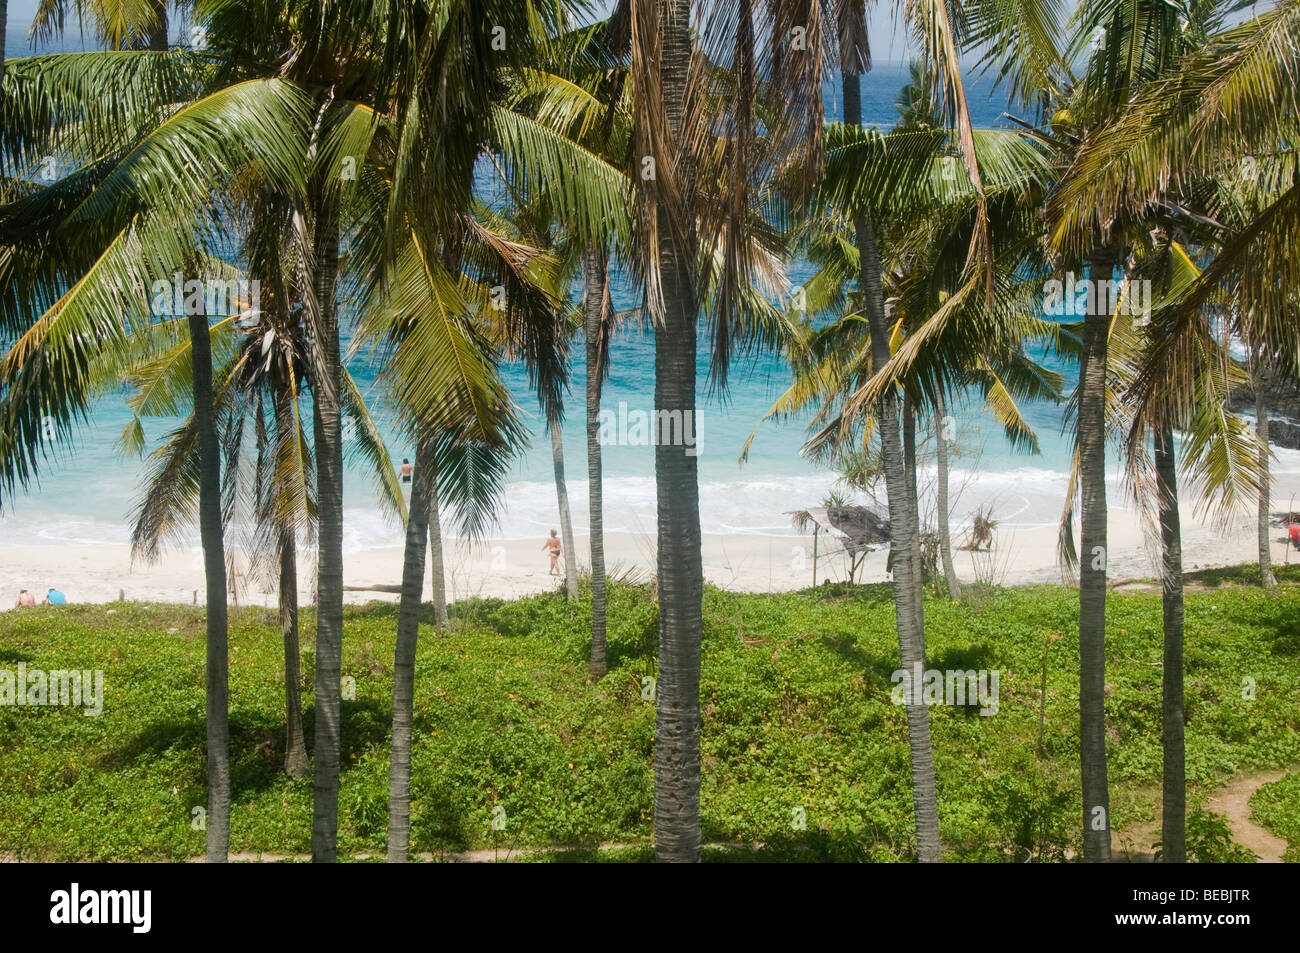 beautiful beach spied through the palm trees in Bali Indonesia Stock Photo